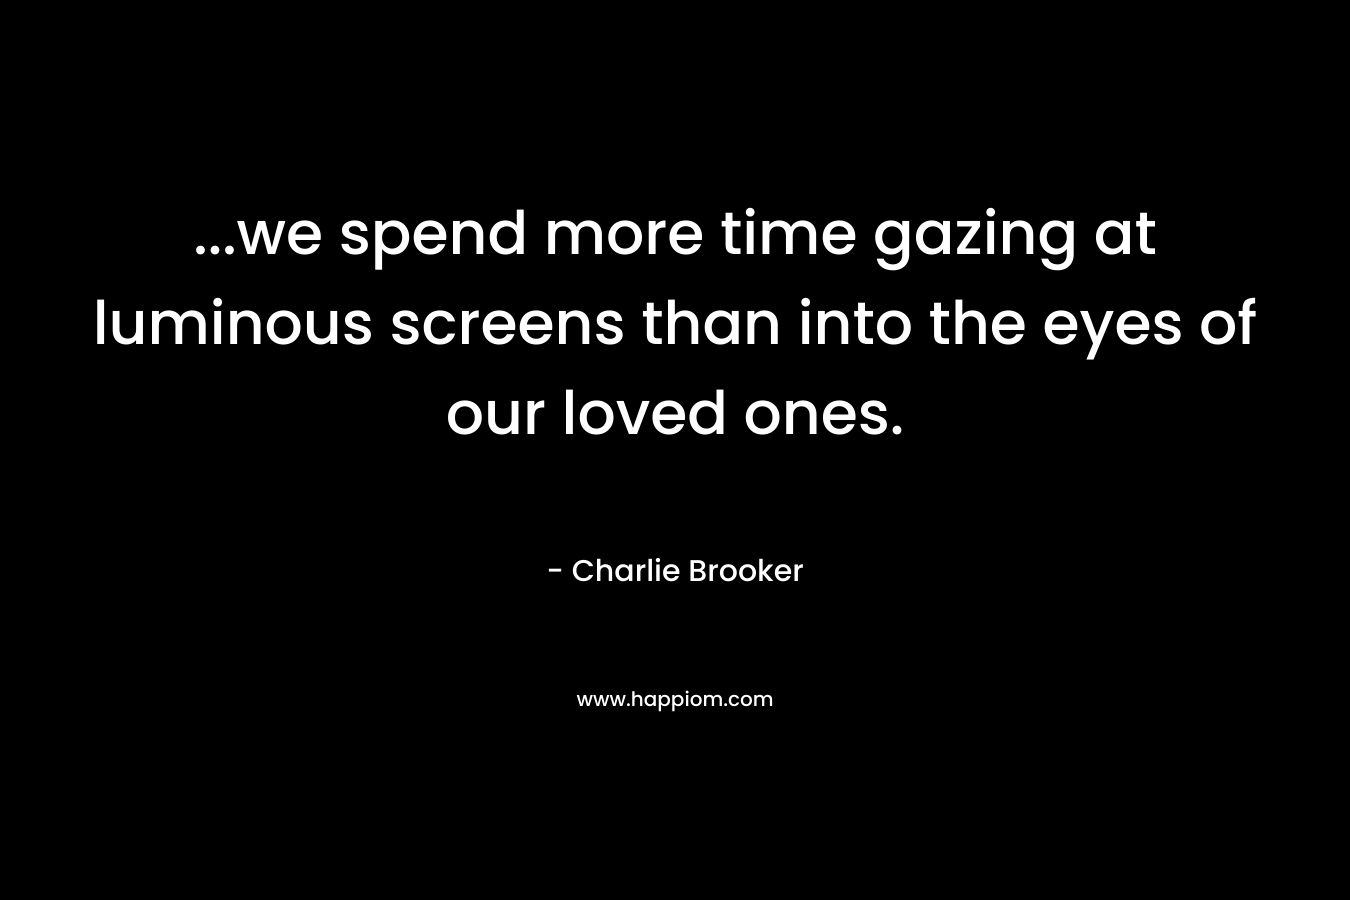 ...we spend more time gazing at luminous screens than into the eyes of our loved ones.